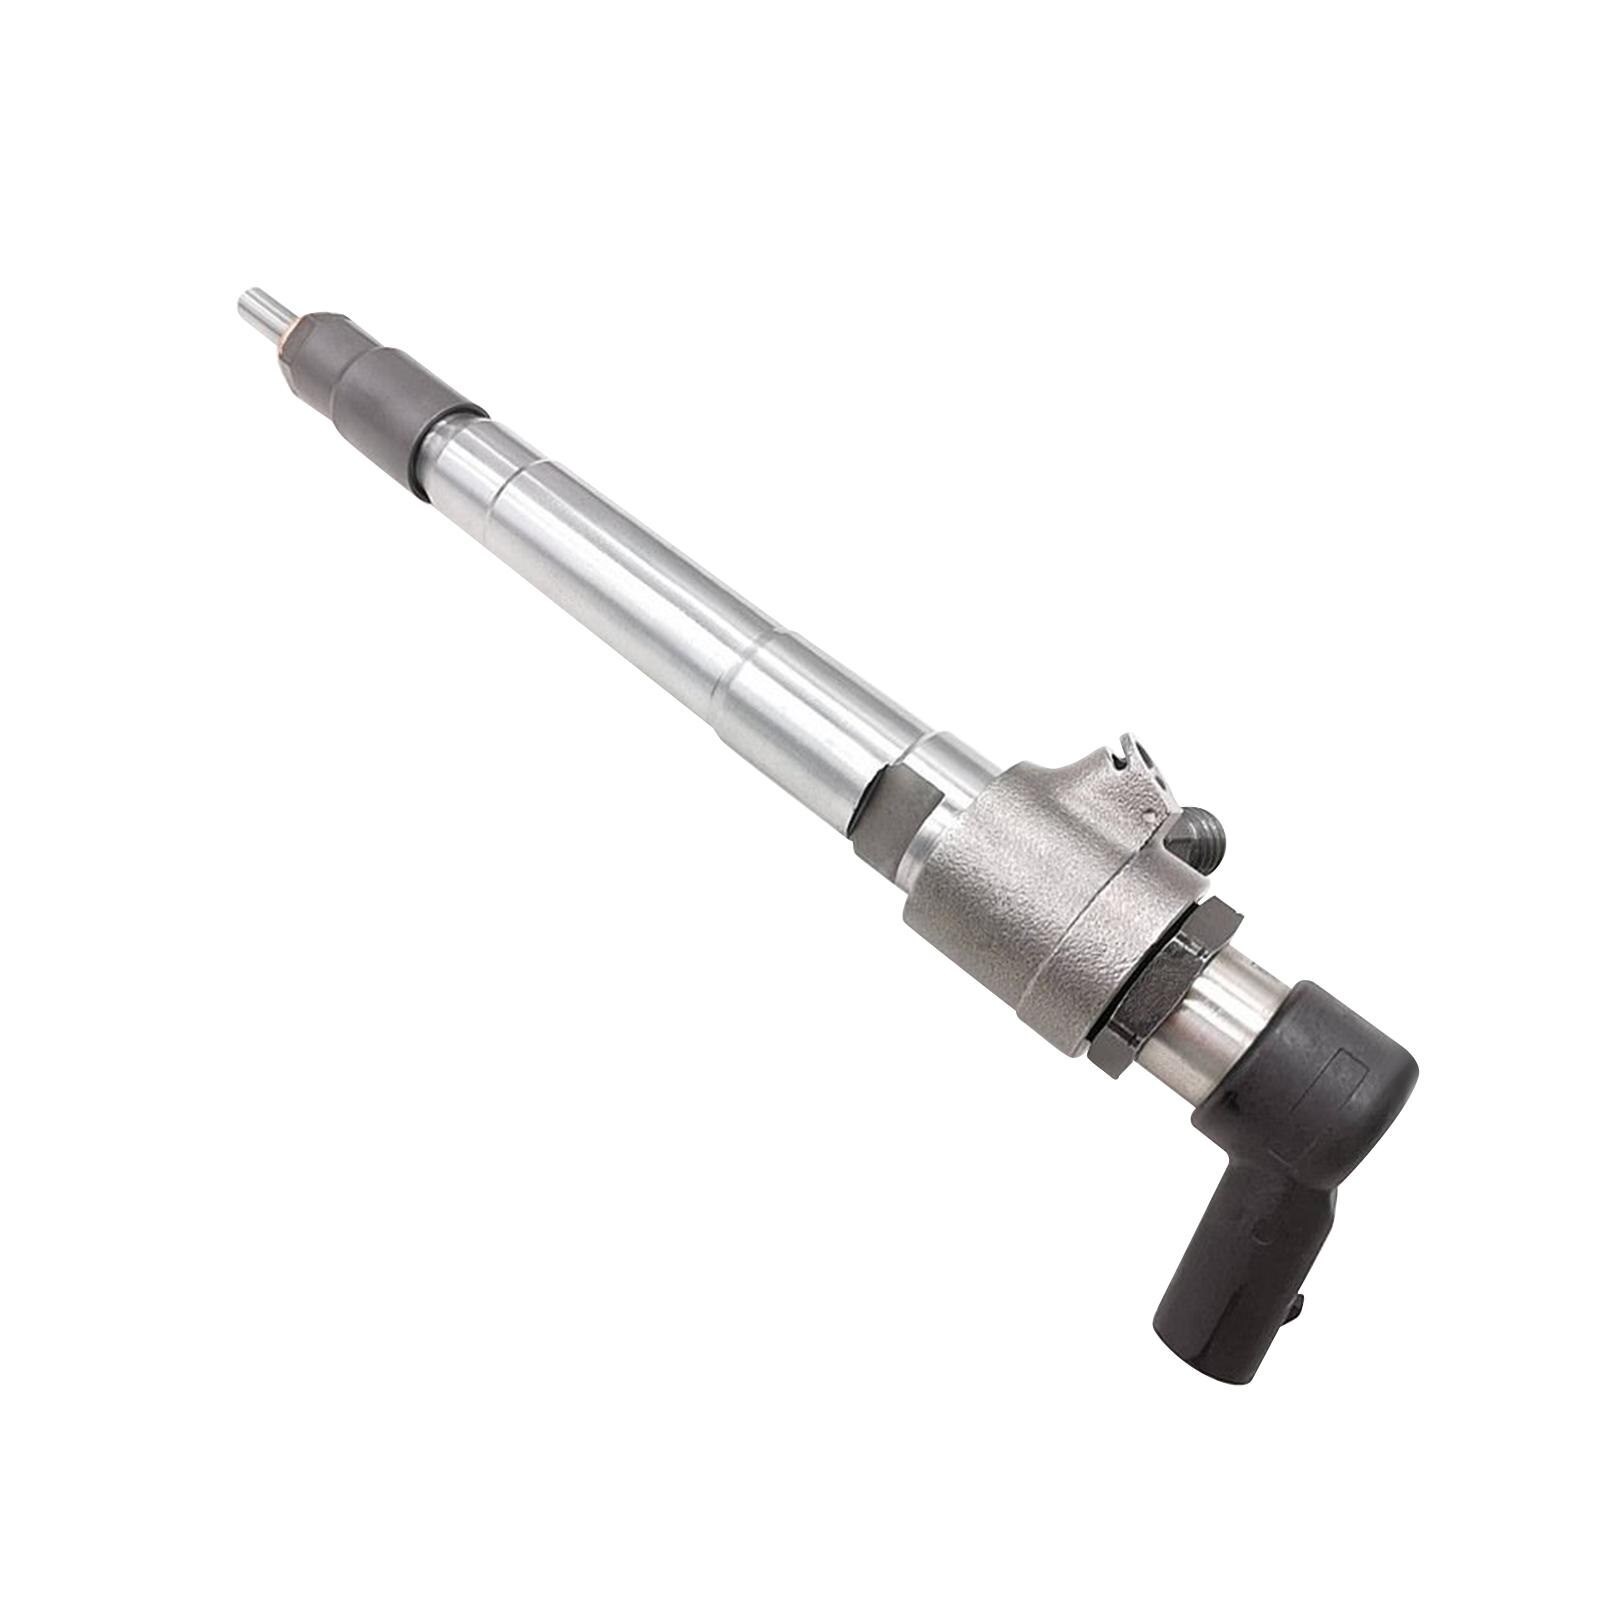 Diesel Fuel Injector Injector, Nozzle Injection, Fuel Injector Nozzle for Relay